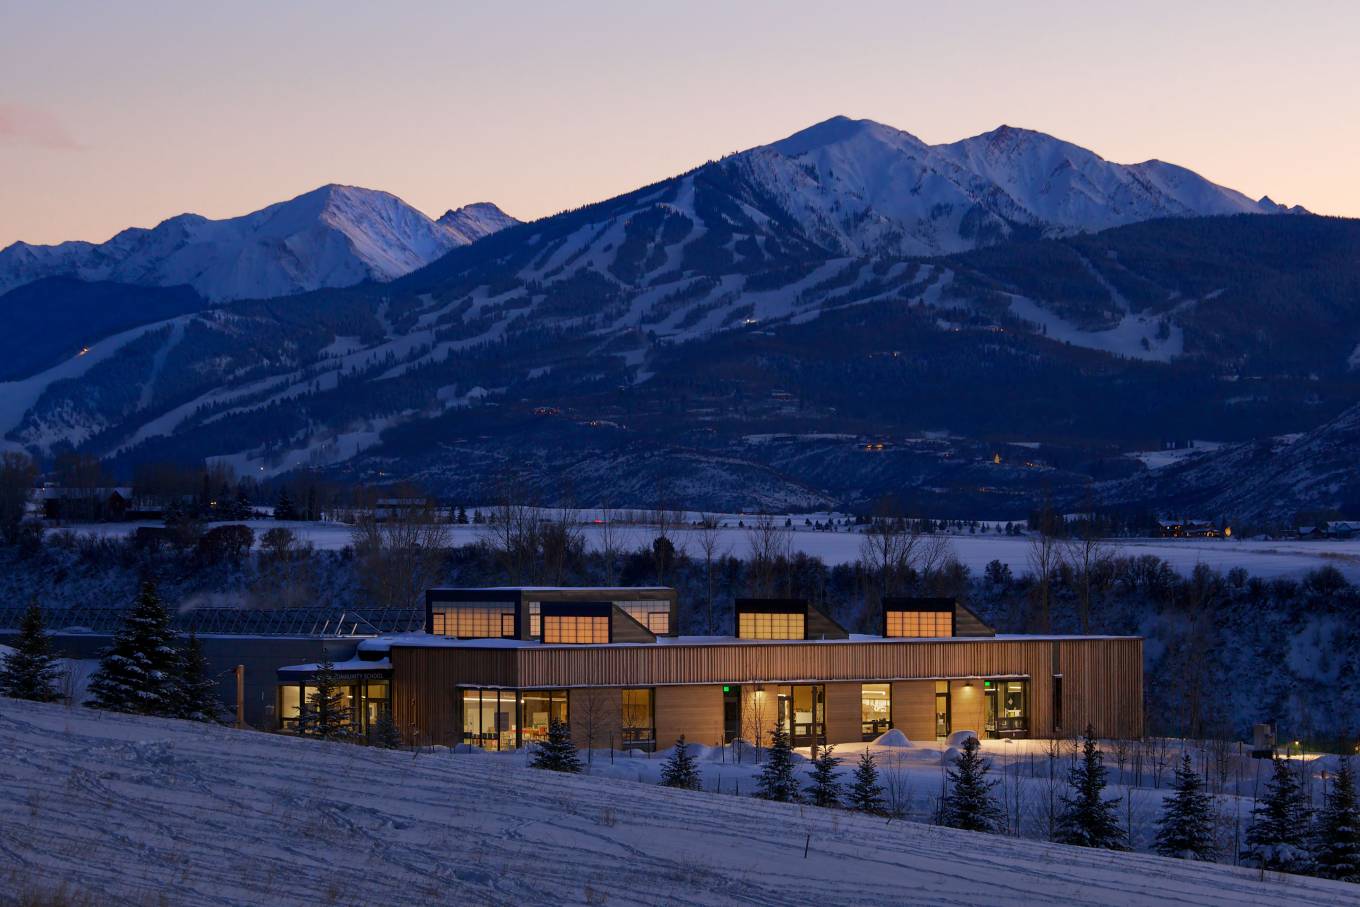 The Aspen Community School includes a new classroom & community building that is fully integrated into the site